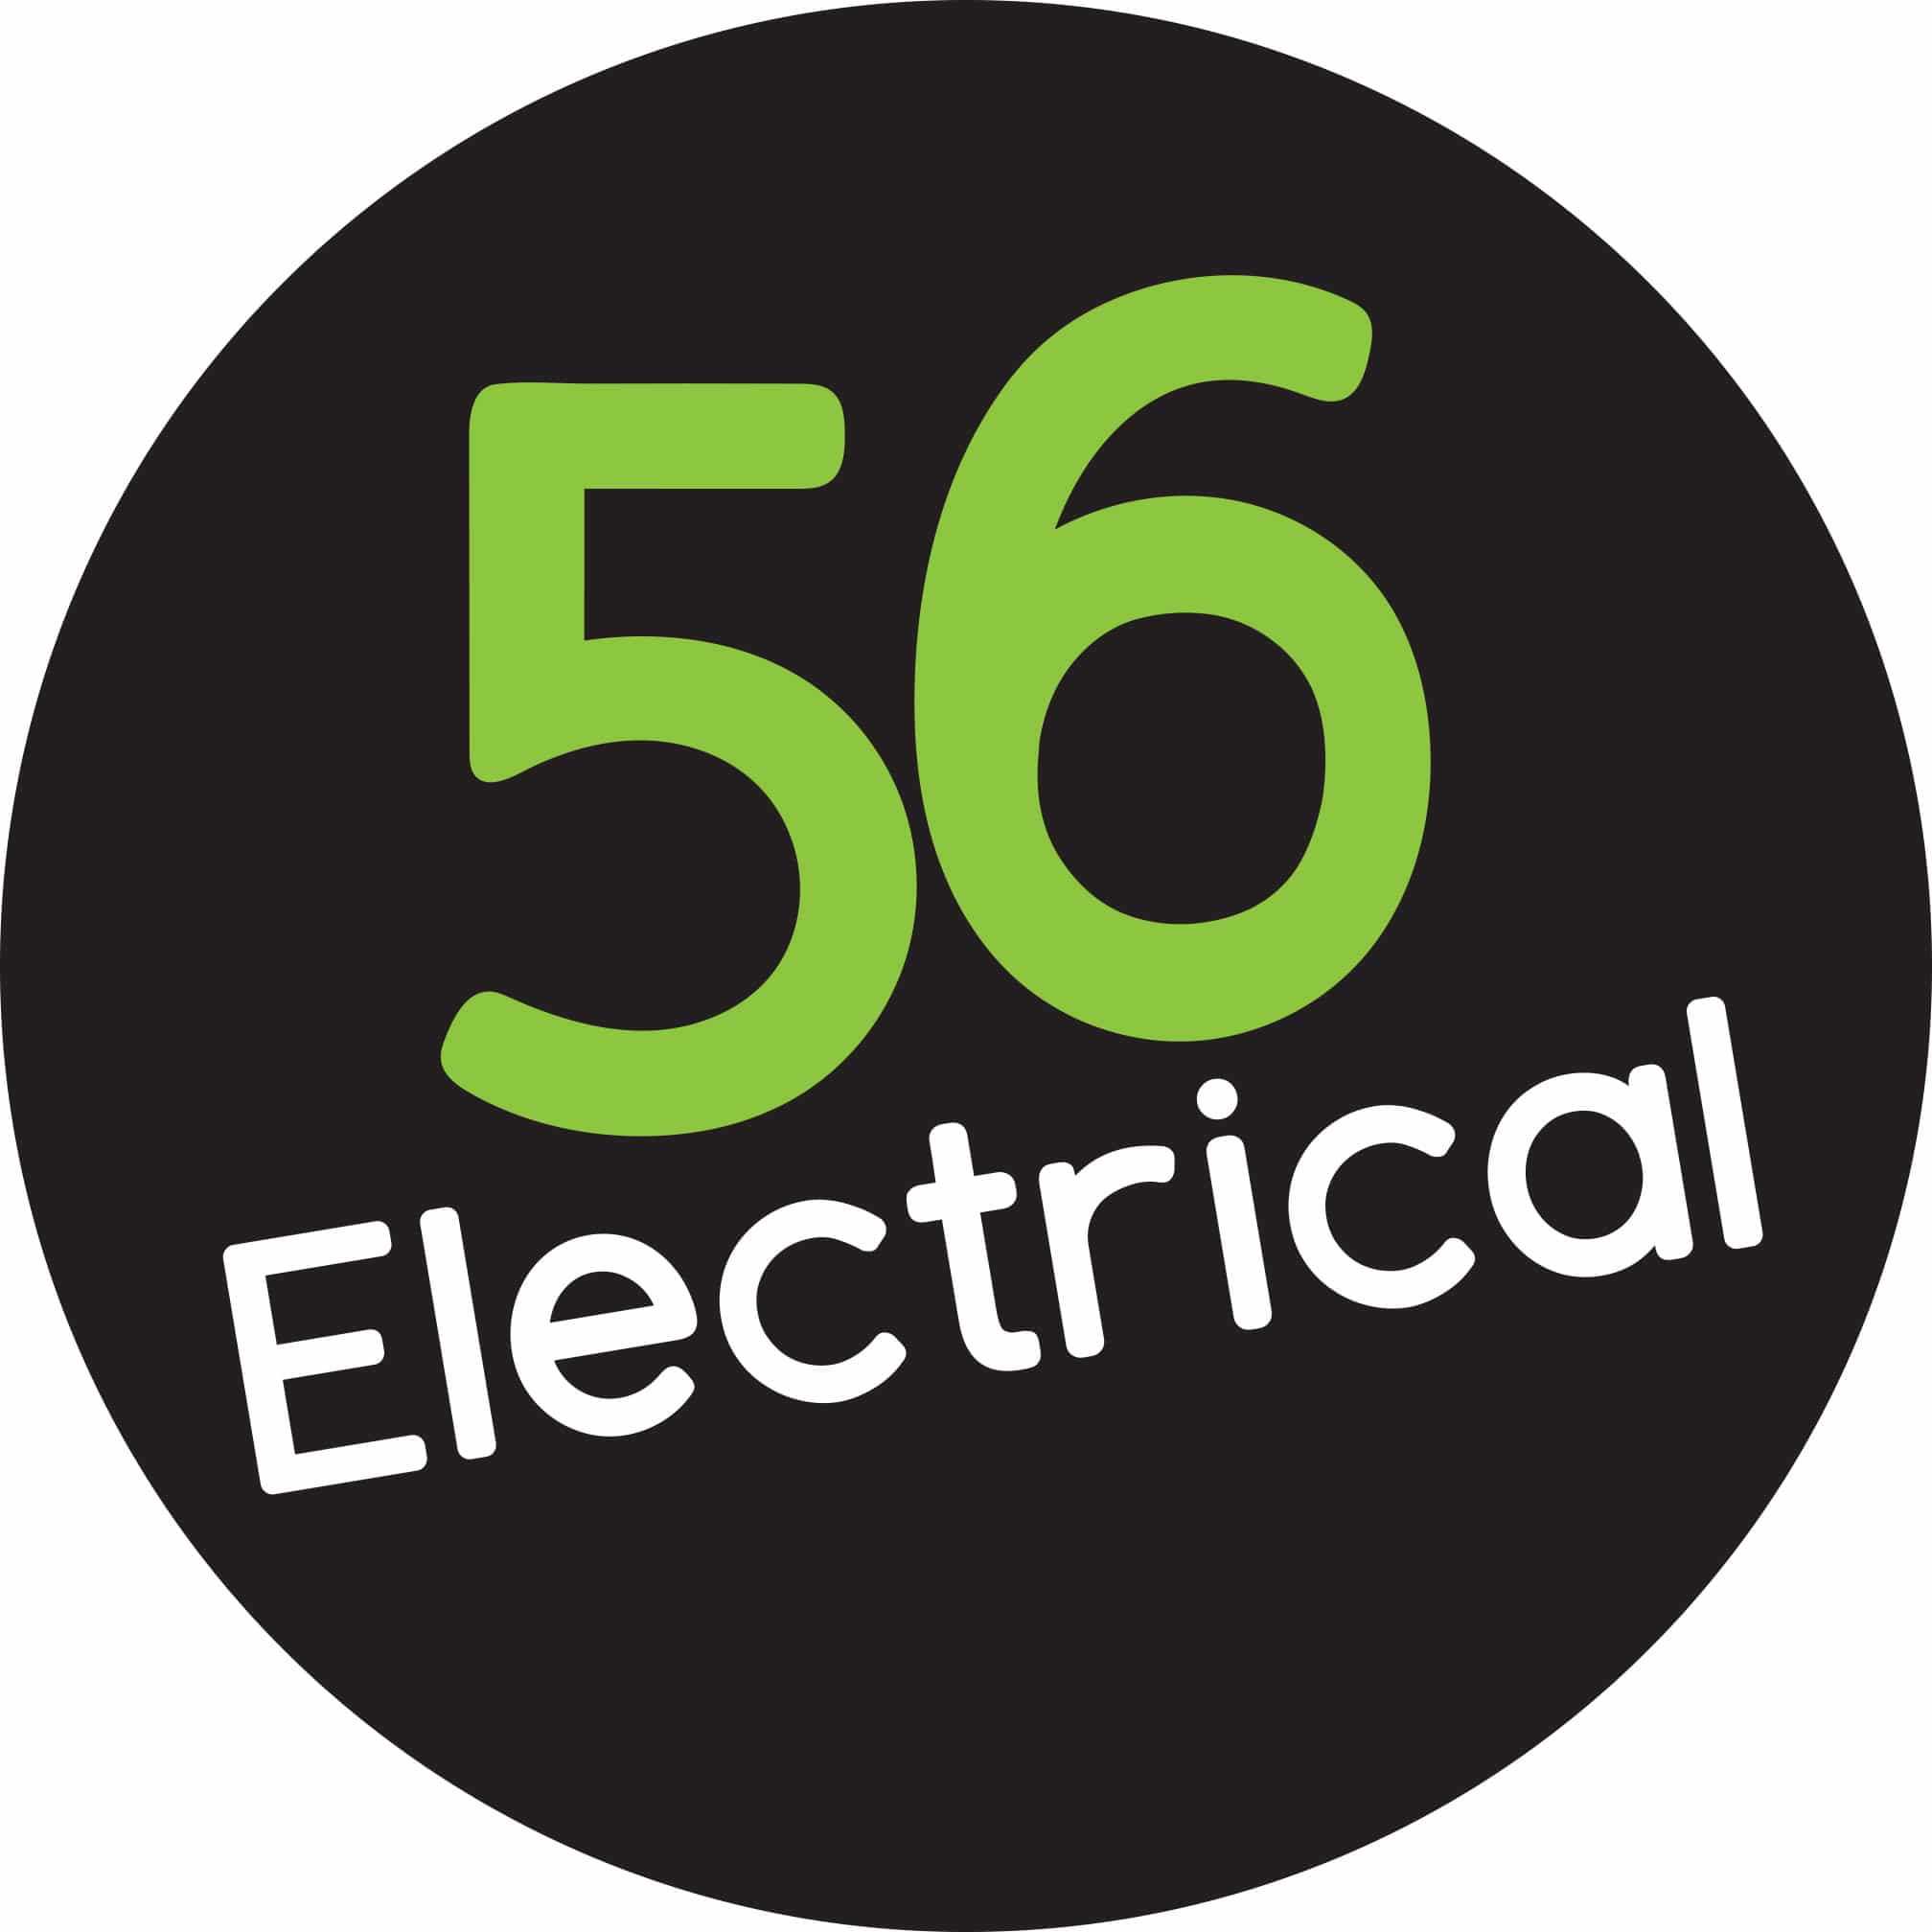 Charlie & The Chocolate Factory, 56electrical logocircle copy